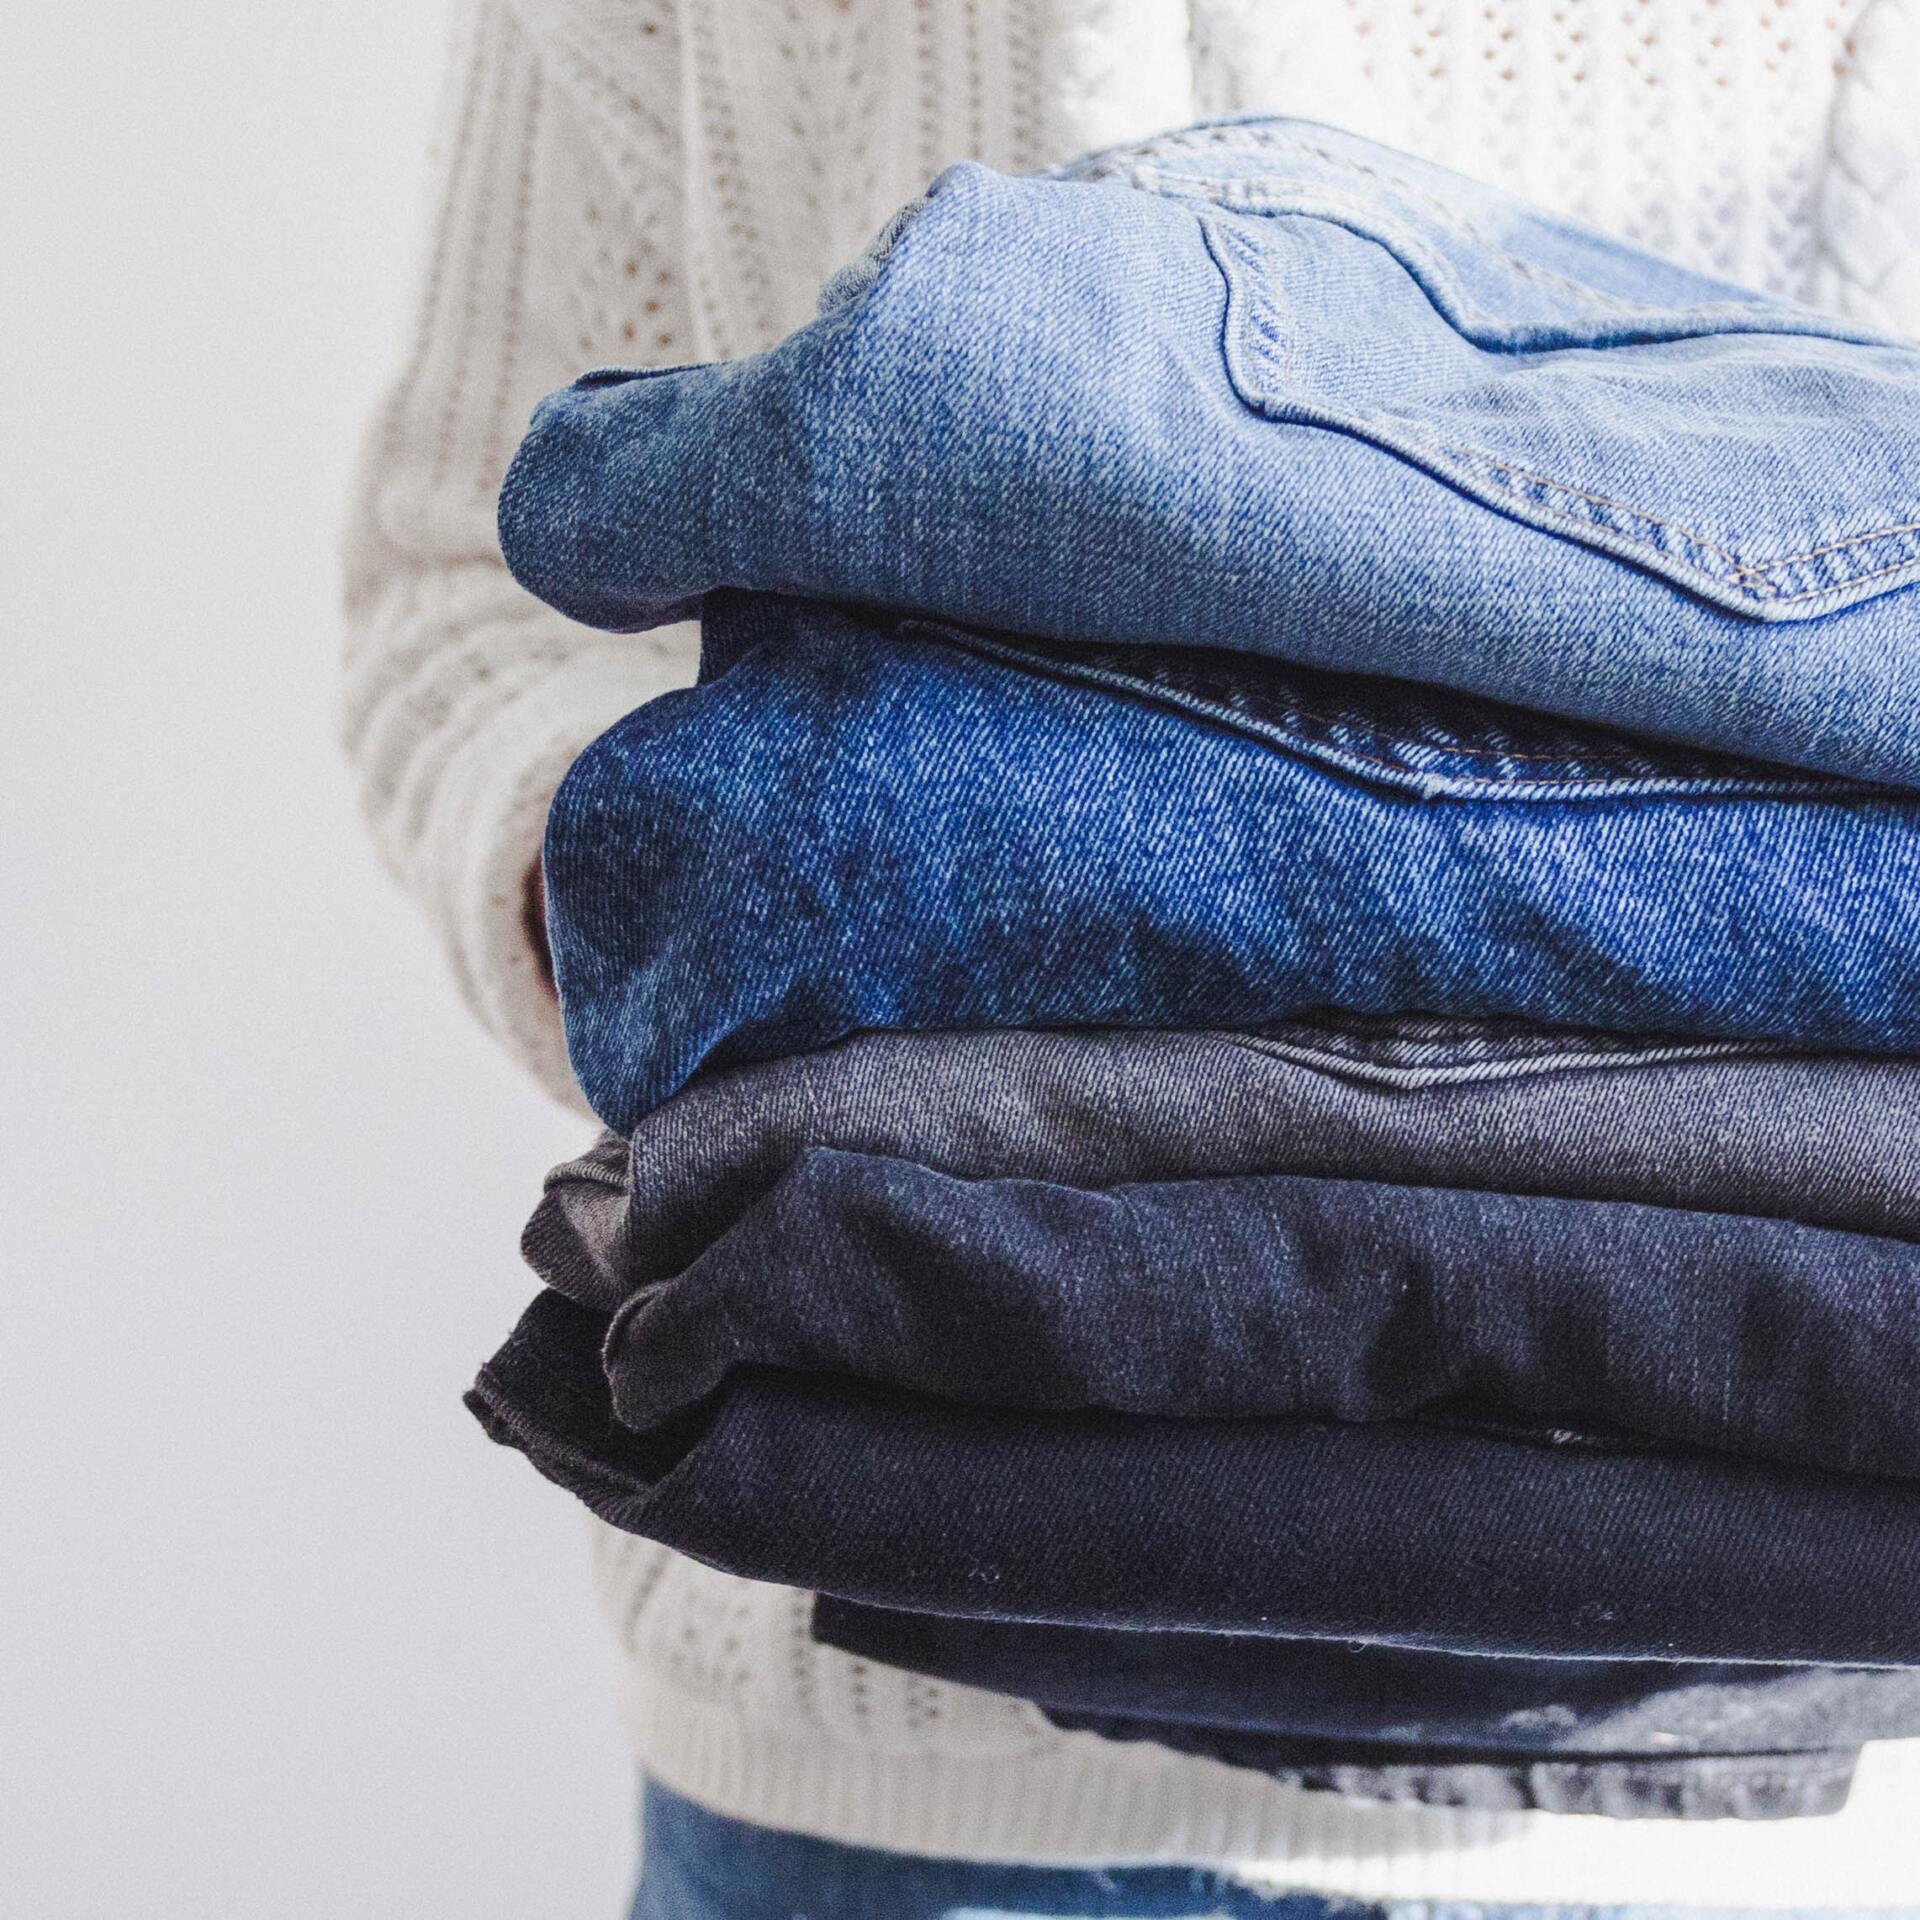 Choosing the Perfect Jeans for Your Body Type